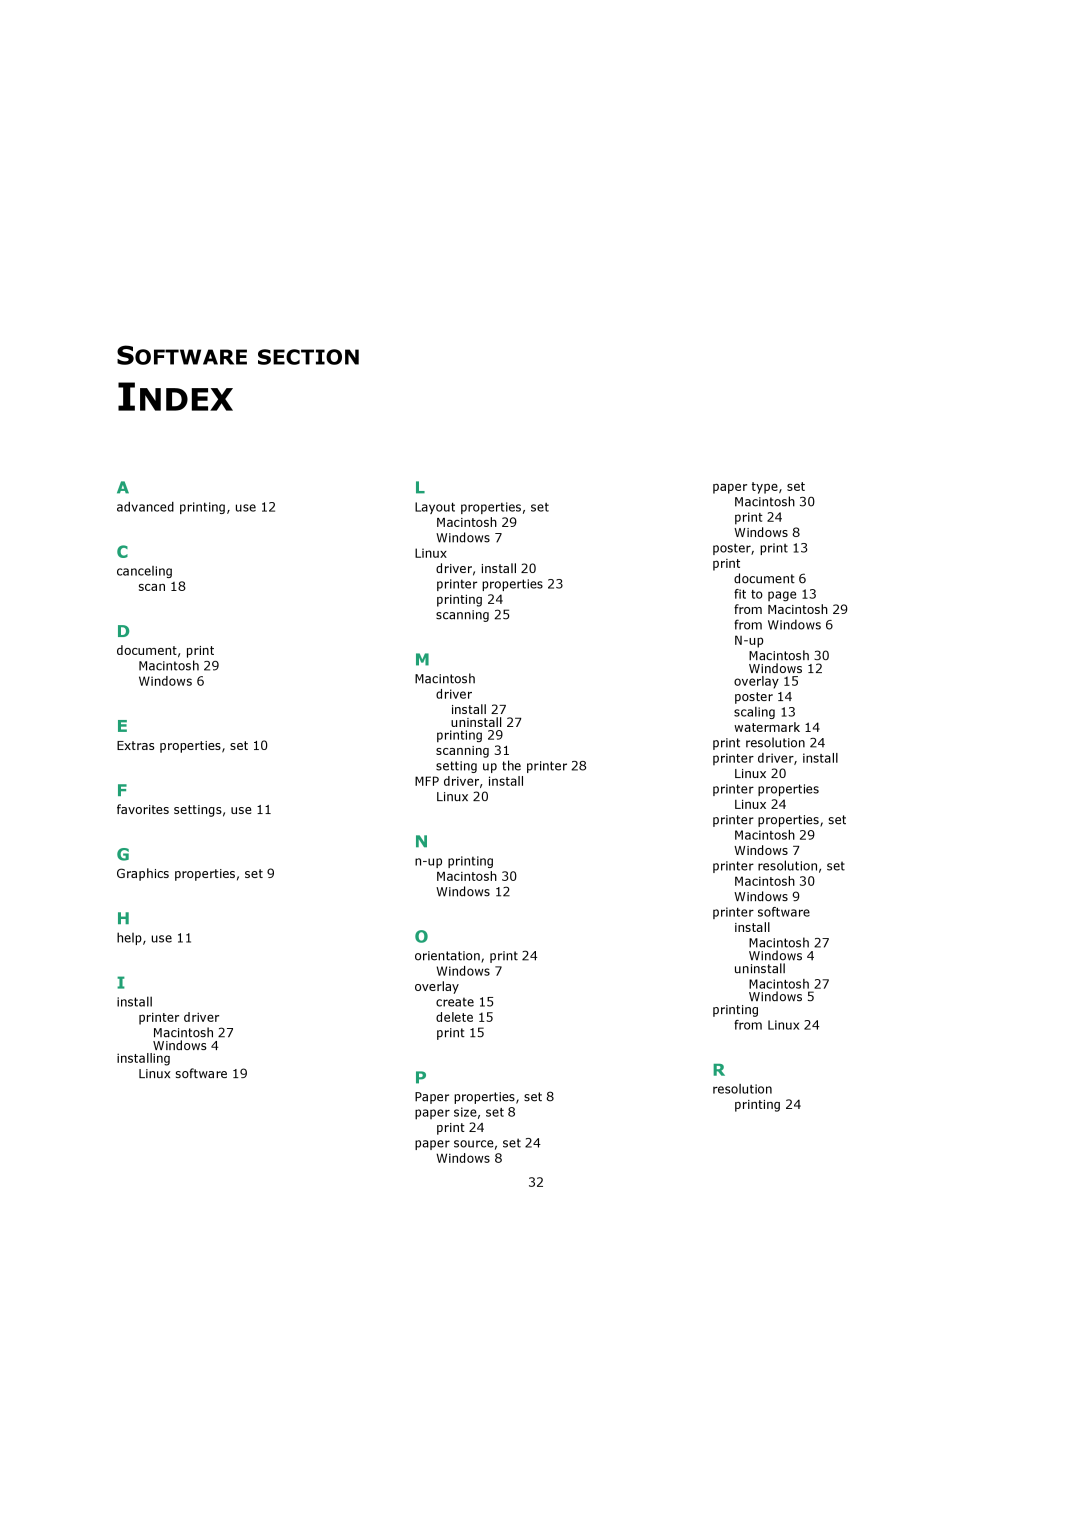 Xerox 3119 manual Index, Software Section 